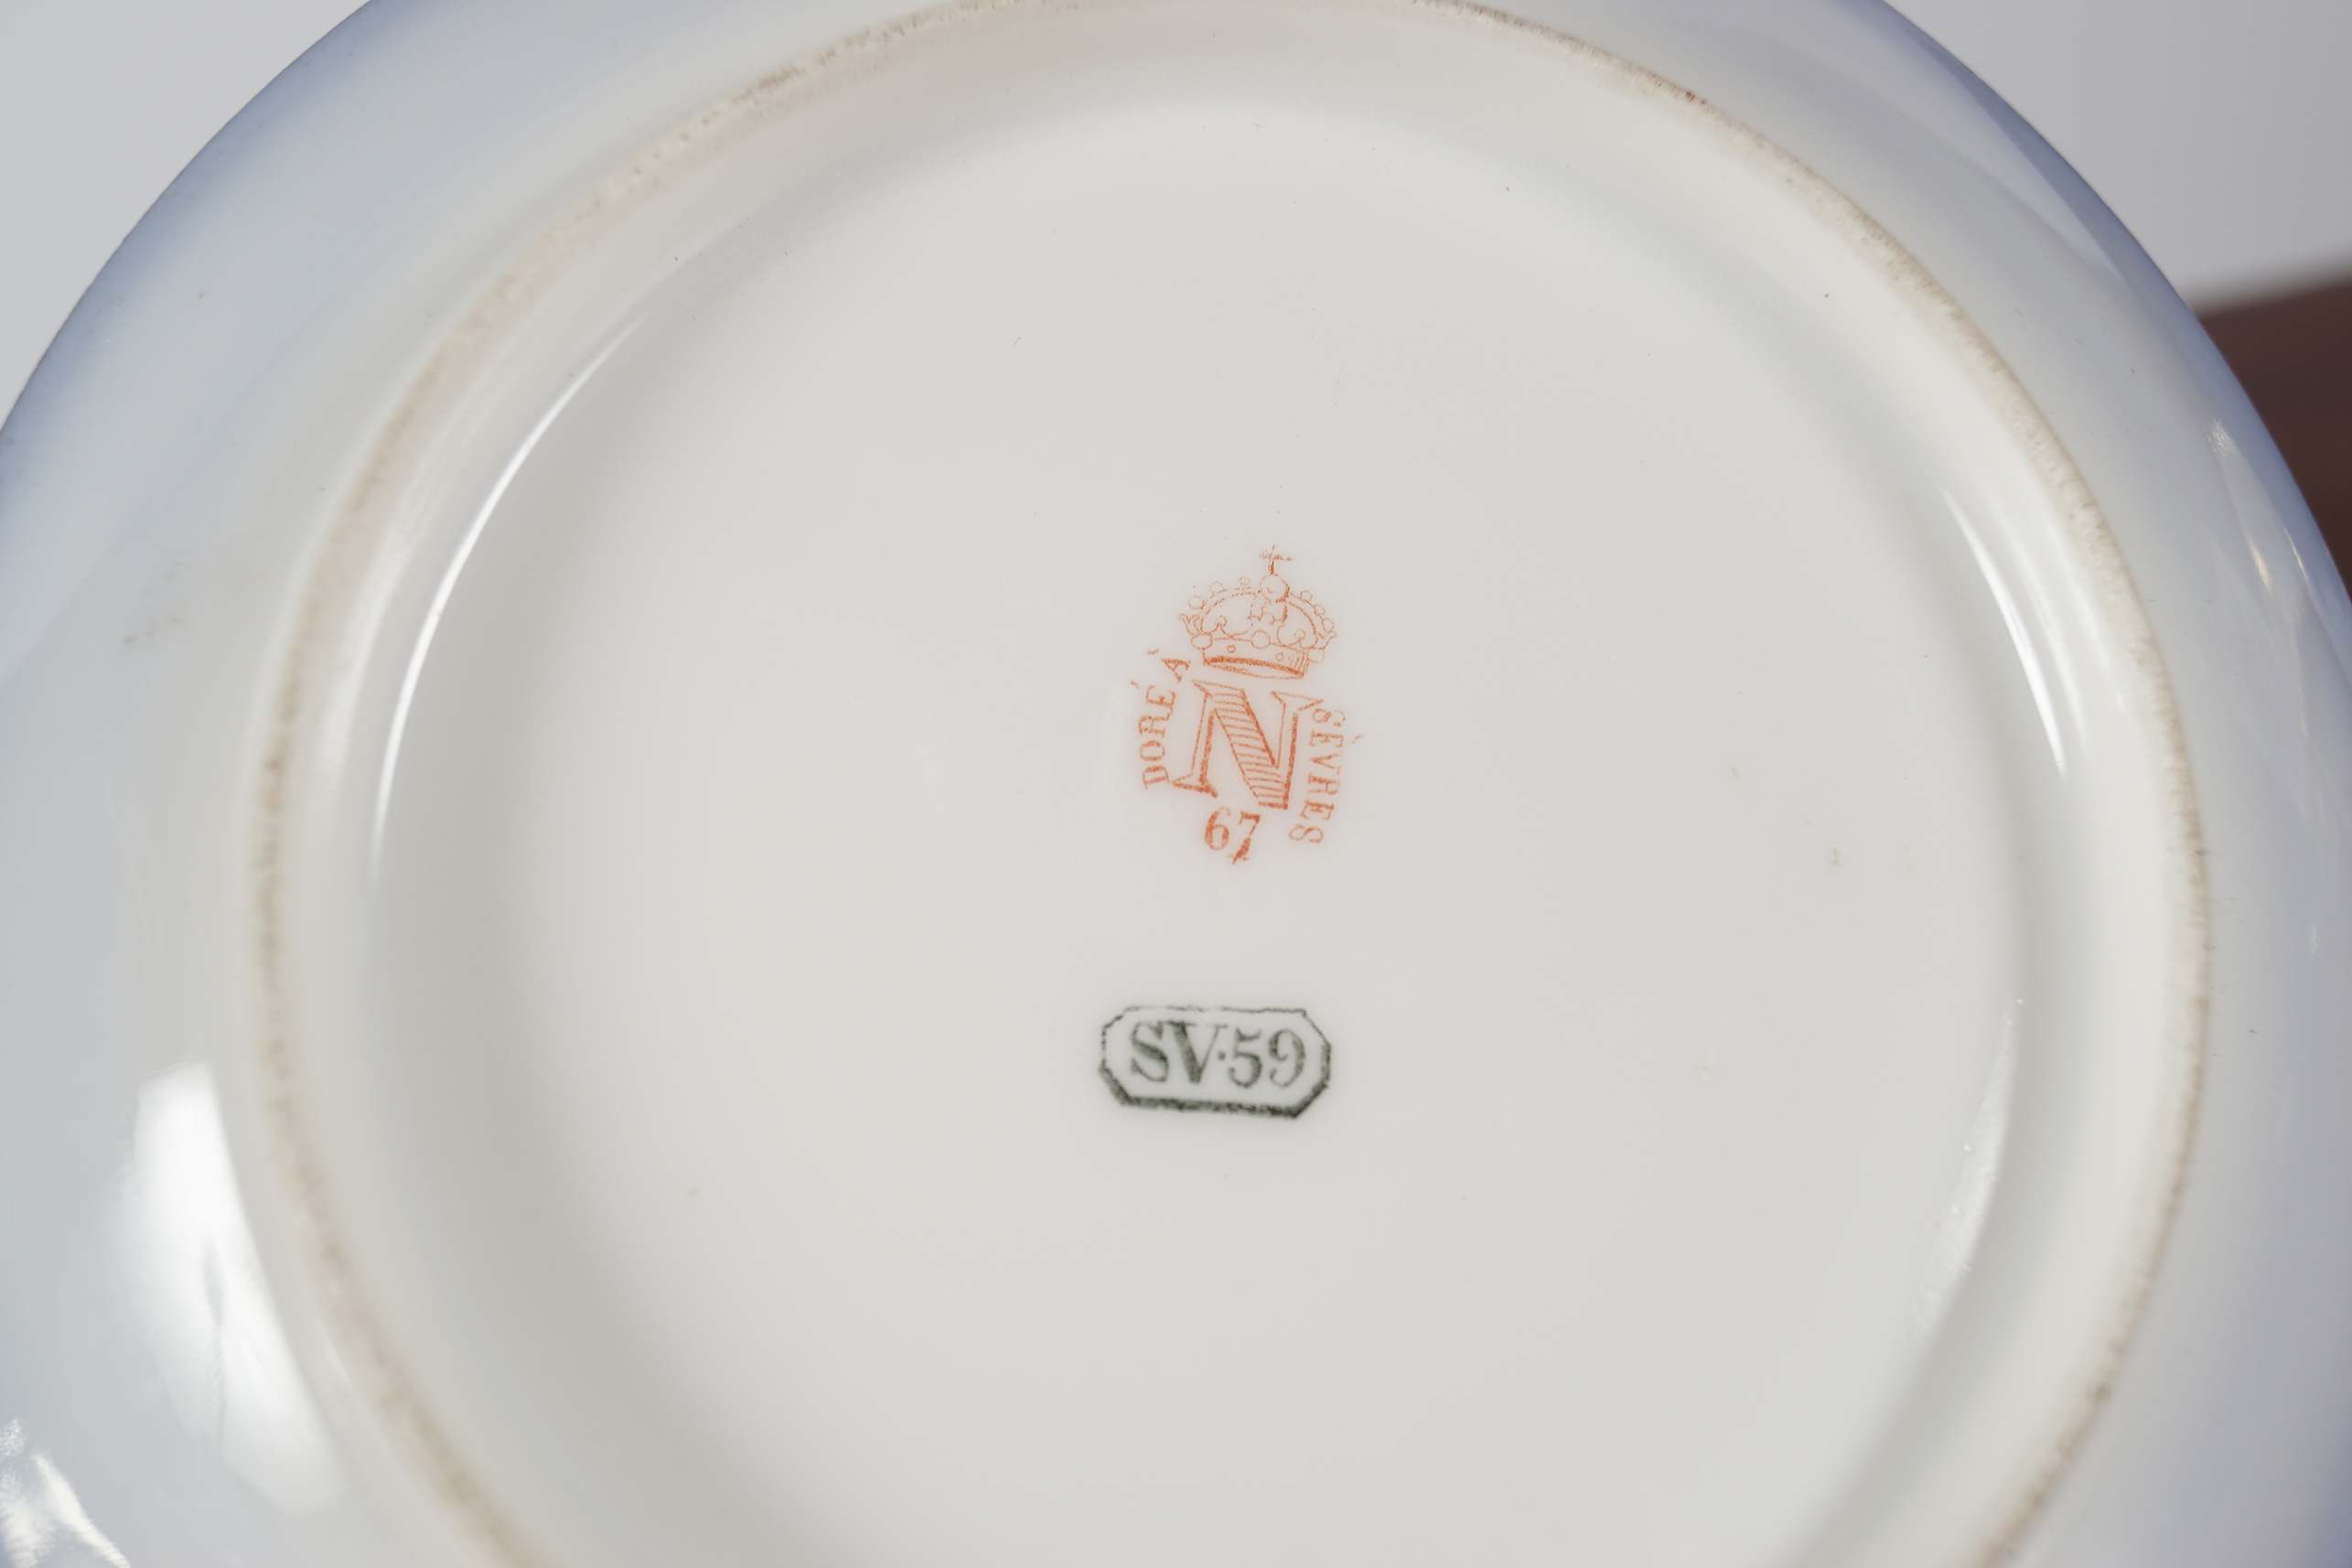 19TH-CENTURY SEVRES CUP AND SAUCER - Image 5 of 5